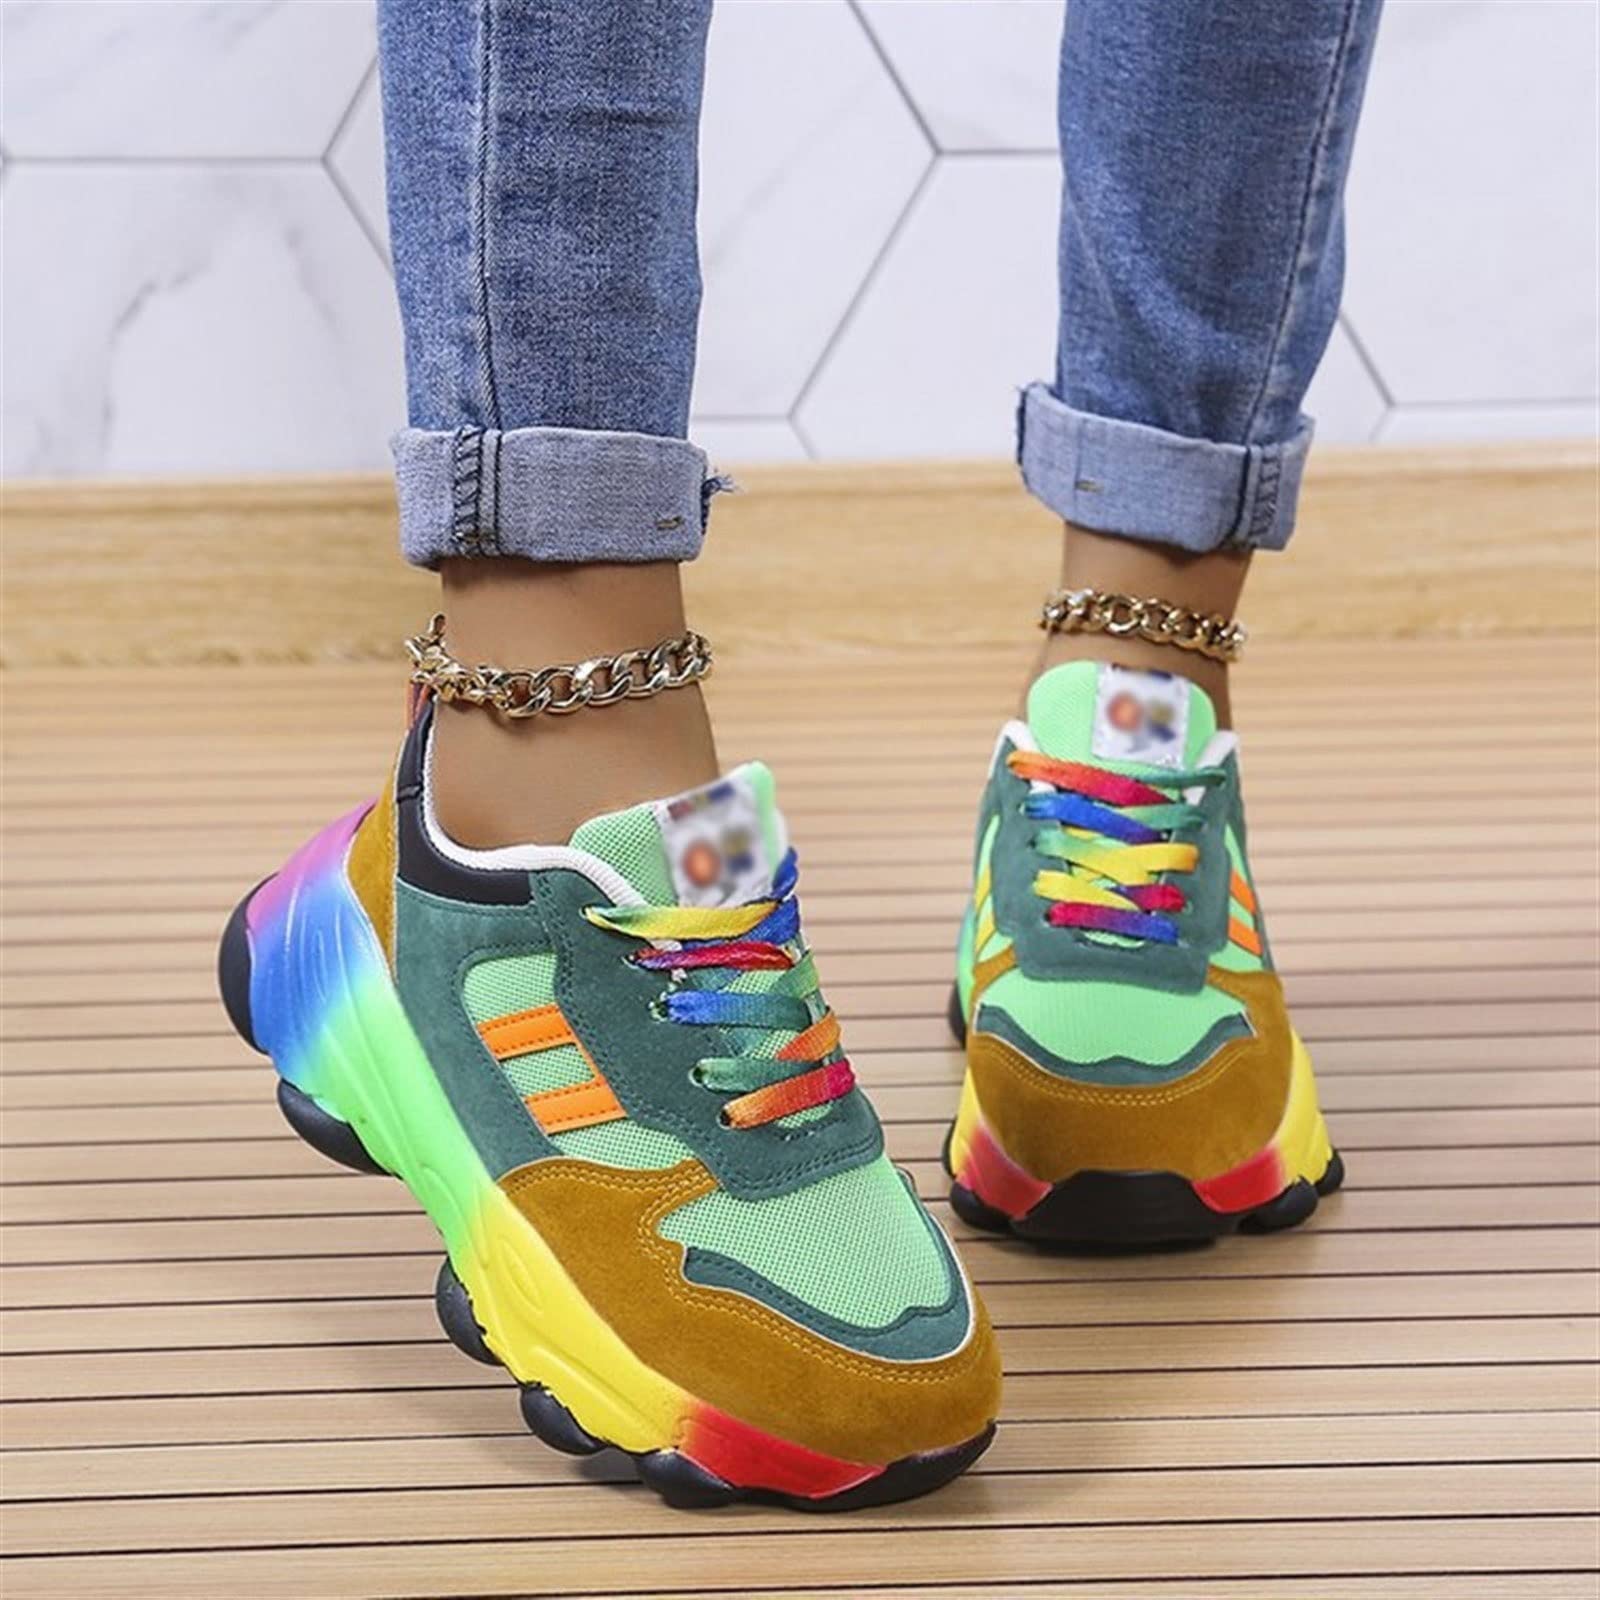 Rainbow Shoe Trainers for Women,Lightweight Colorful Outdoor Sports Shoes Street Fashion Thick Sole Running Sneakers (Color : Green, Size : 8.5)